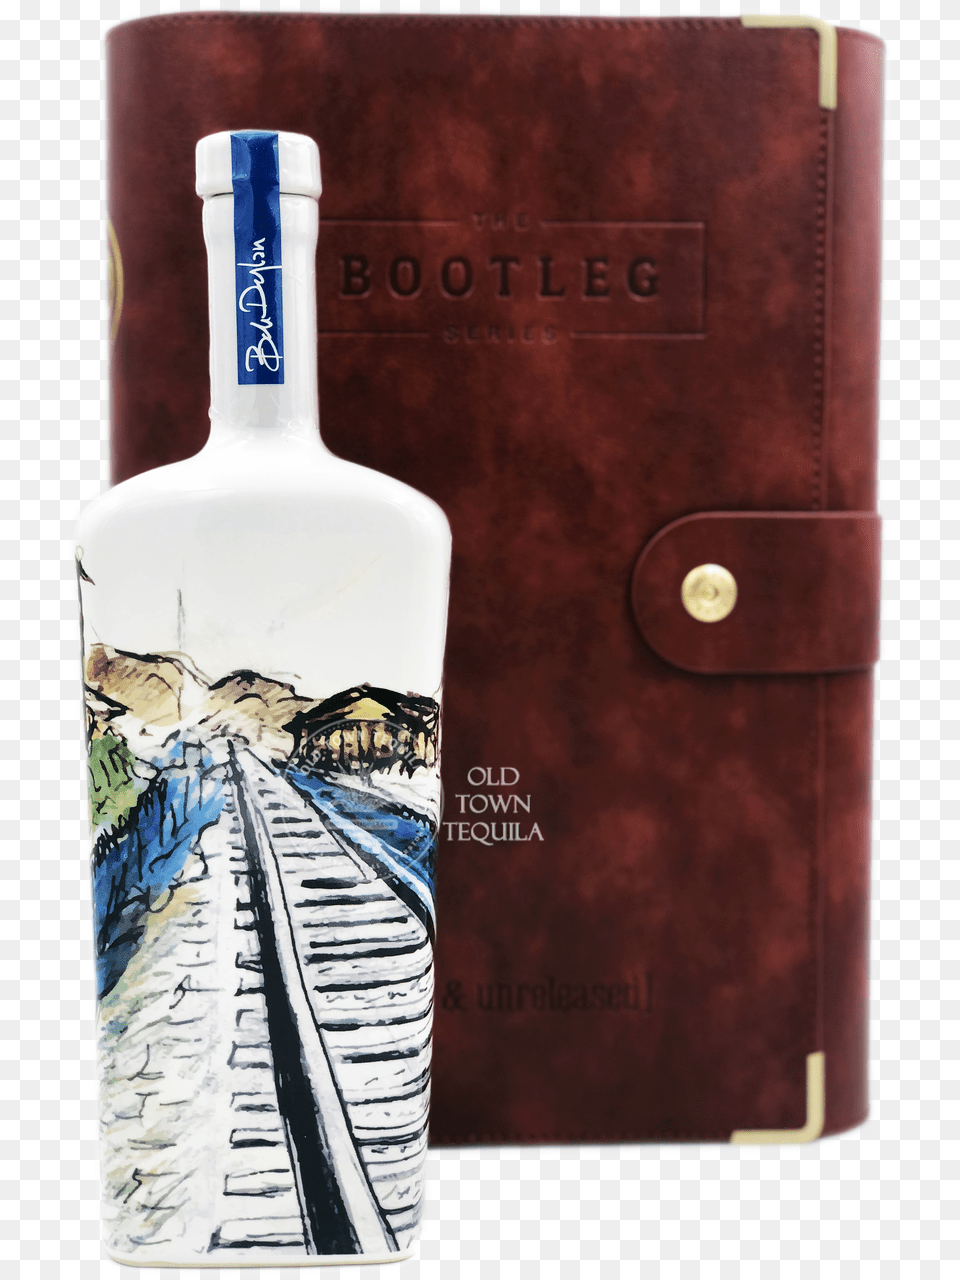 Heaven S Door The Bootleg Series 2019 Edition Whiskey, Alcohol, Beverage, Liquor Free Png Download